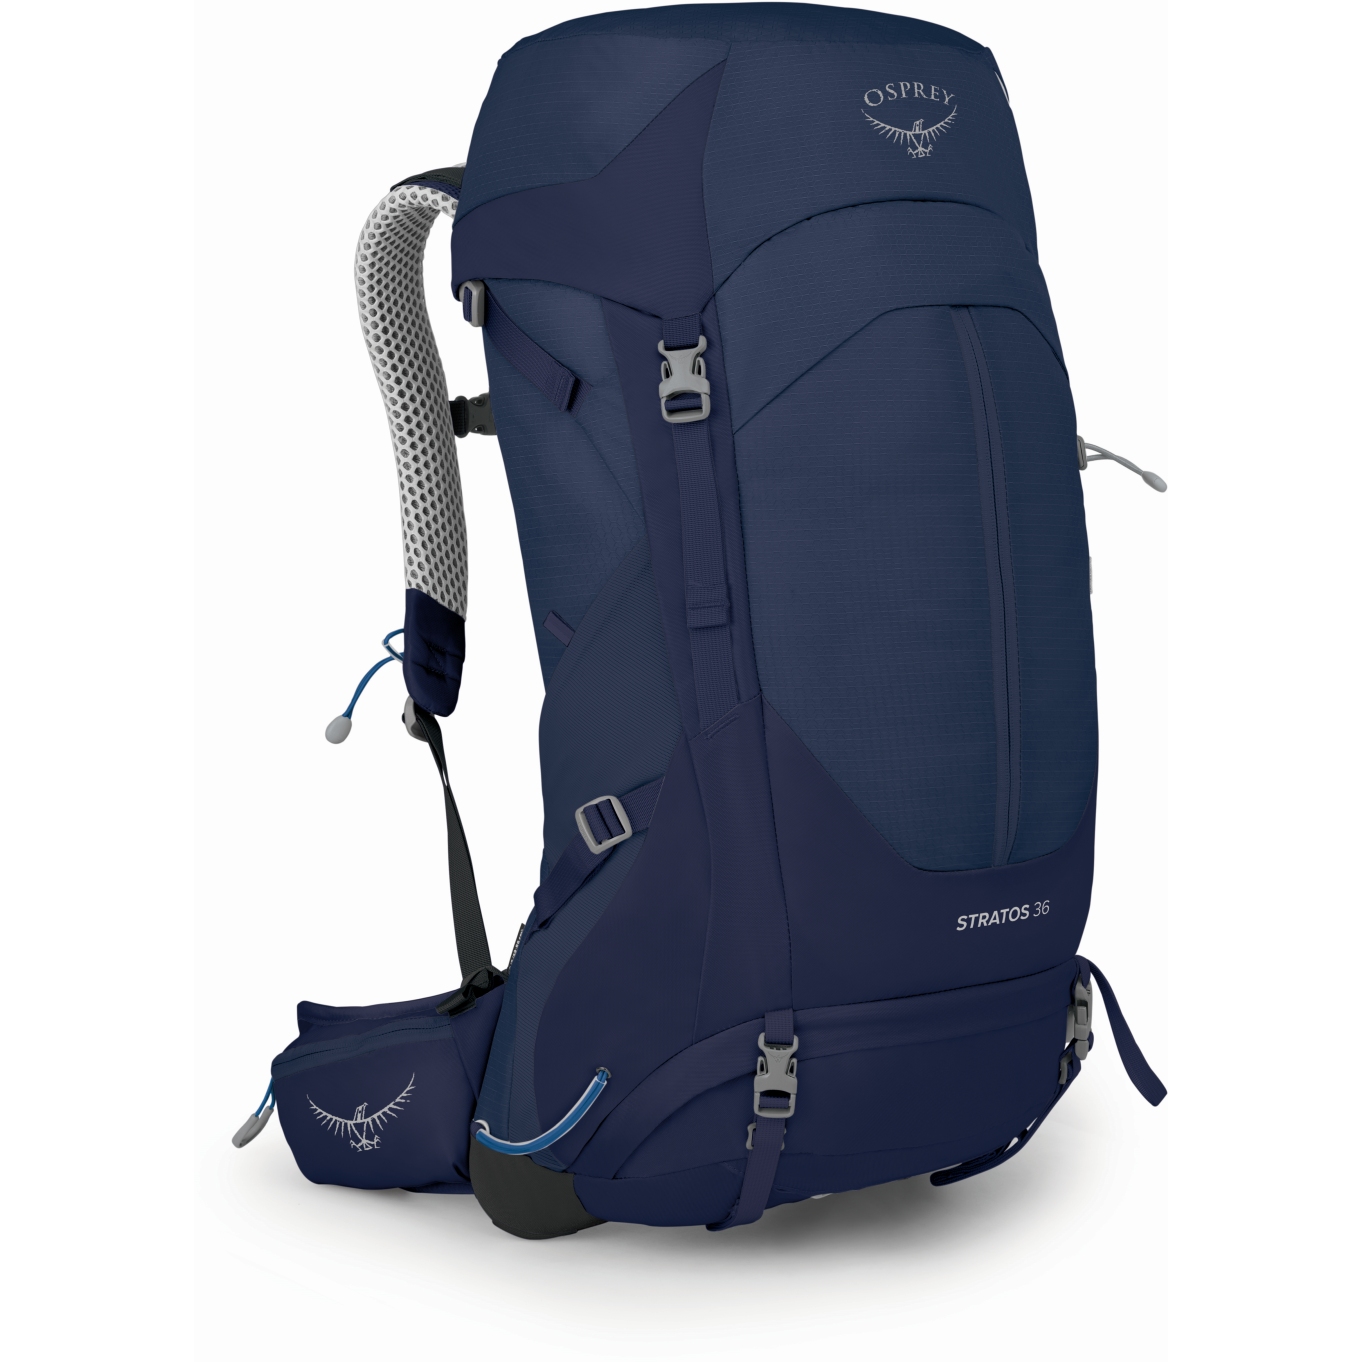 Picture of Osprey Stratos 36 Backpack - Cetacean Blue